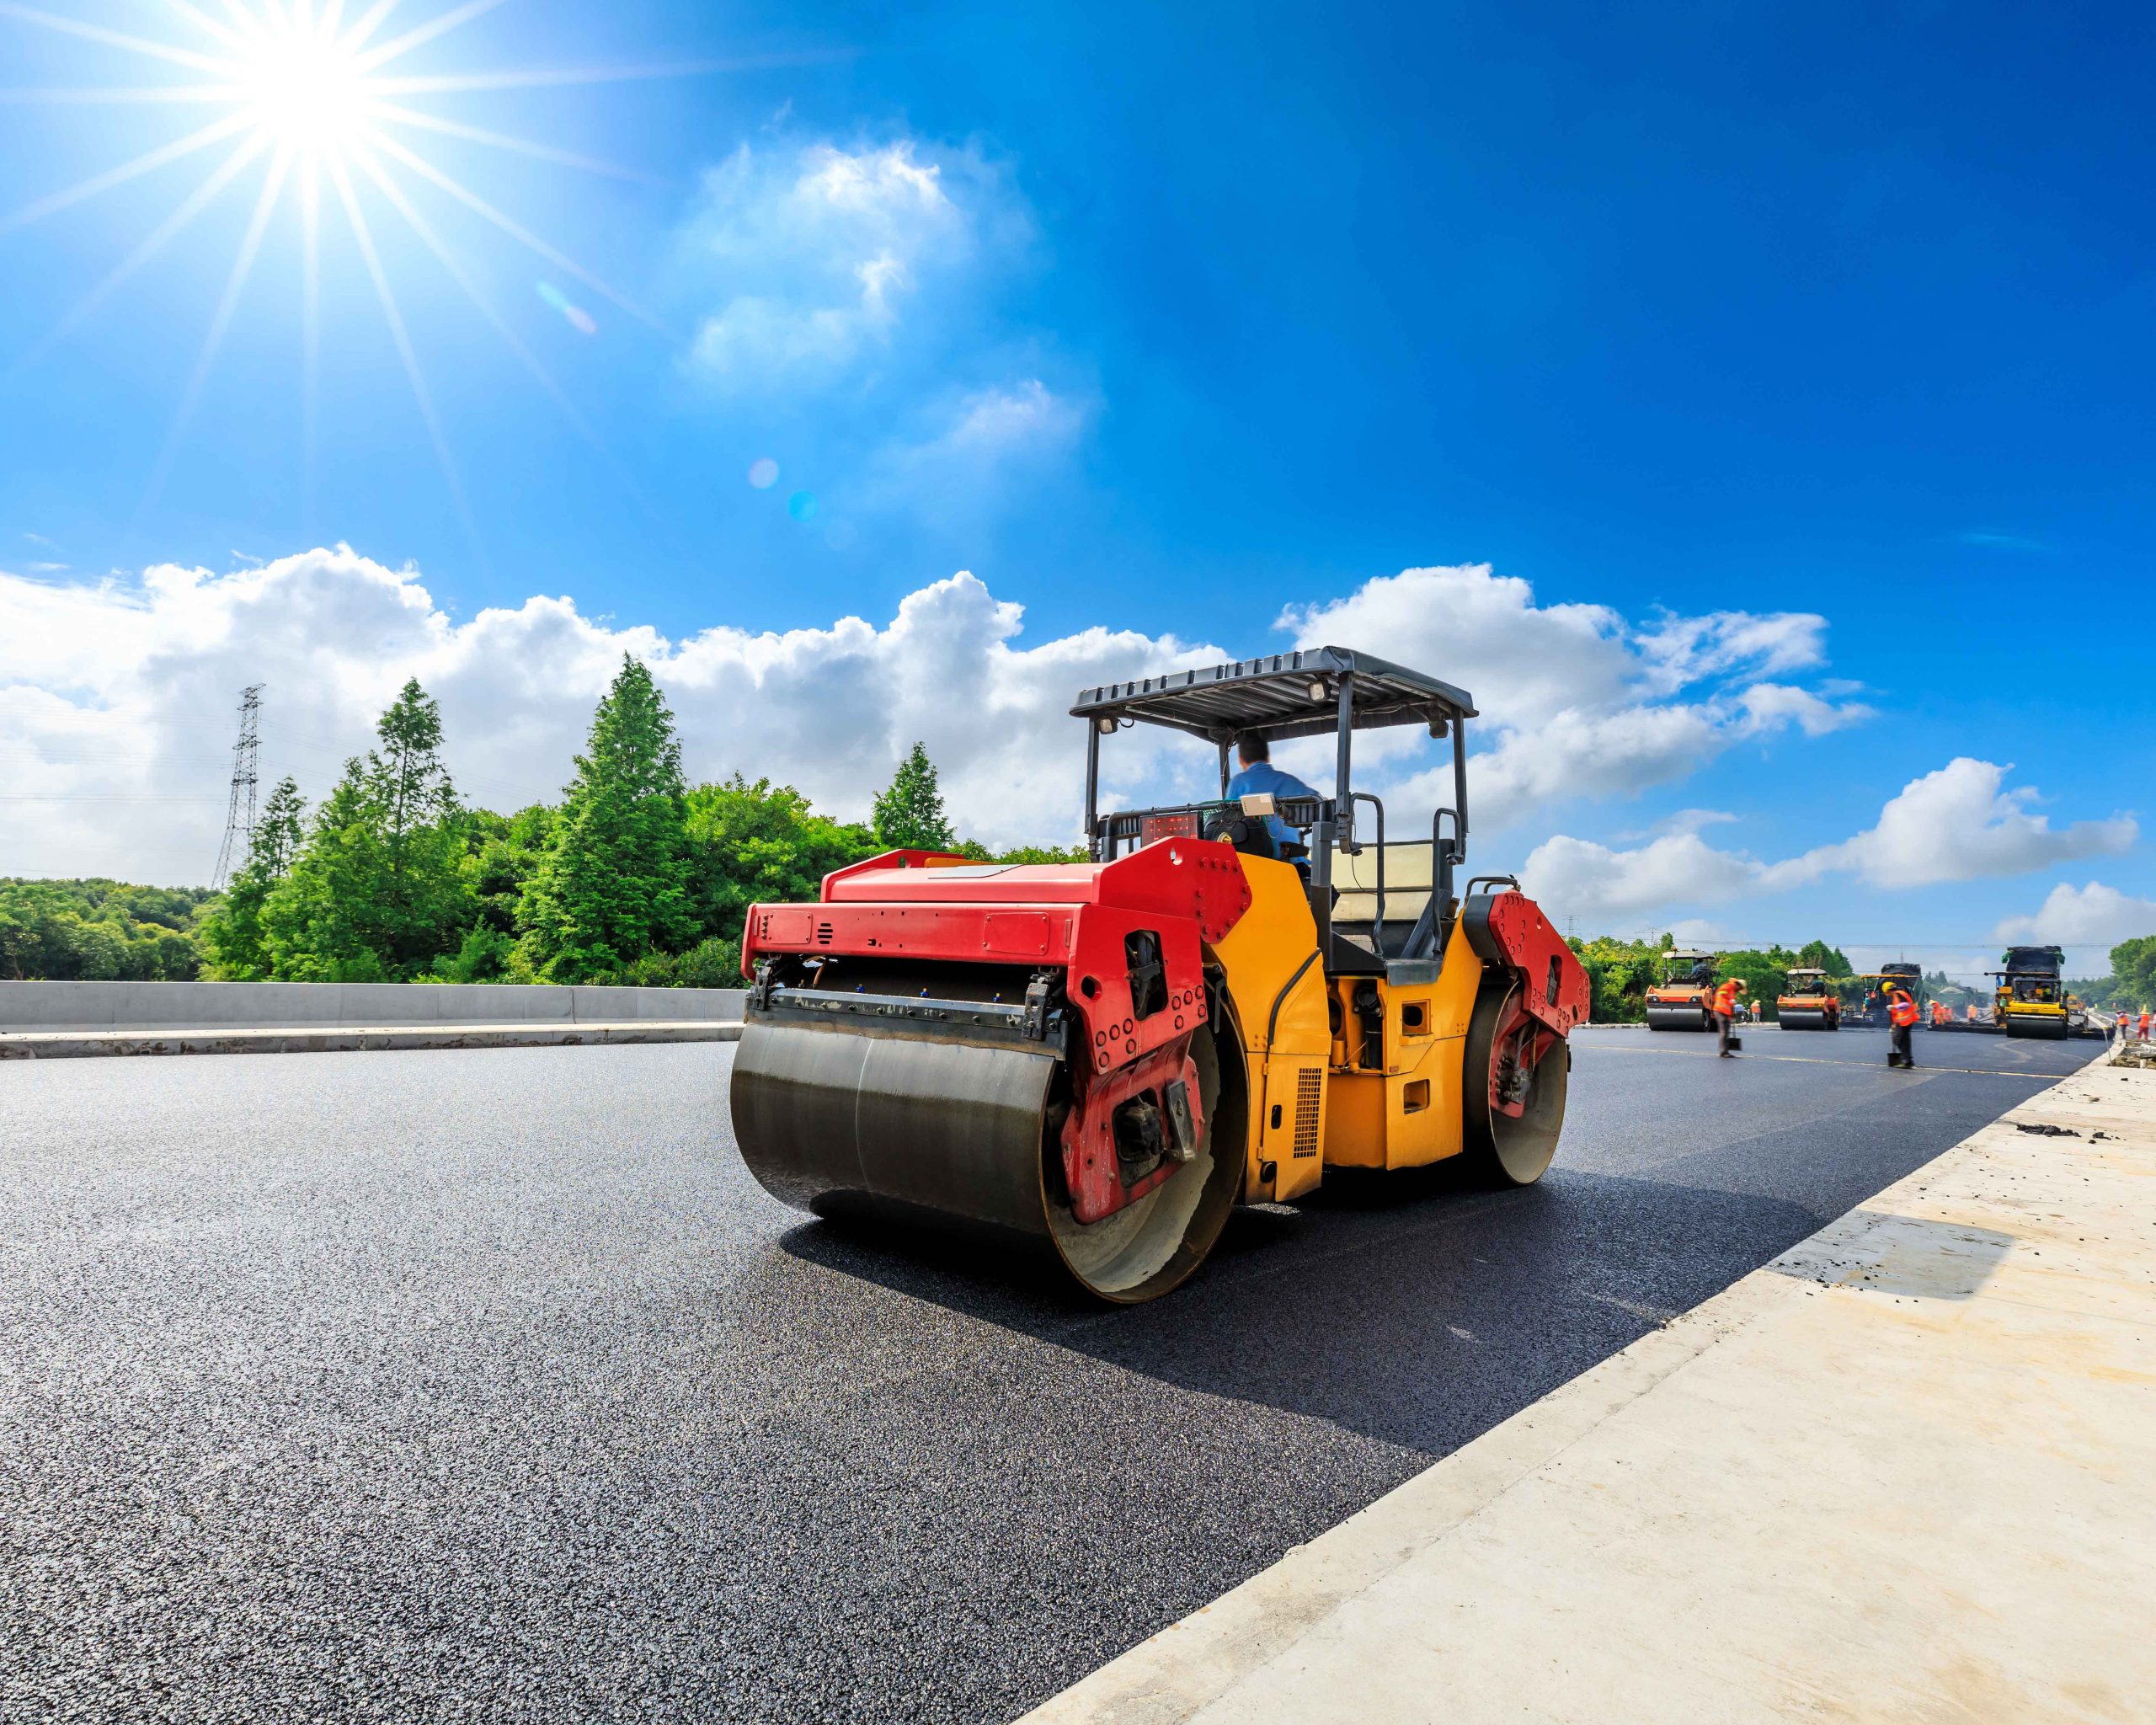 A construction crew operates rollers to complete an asphalt paving job.